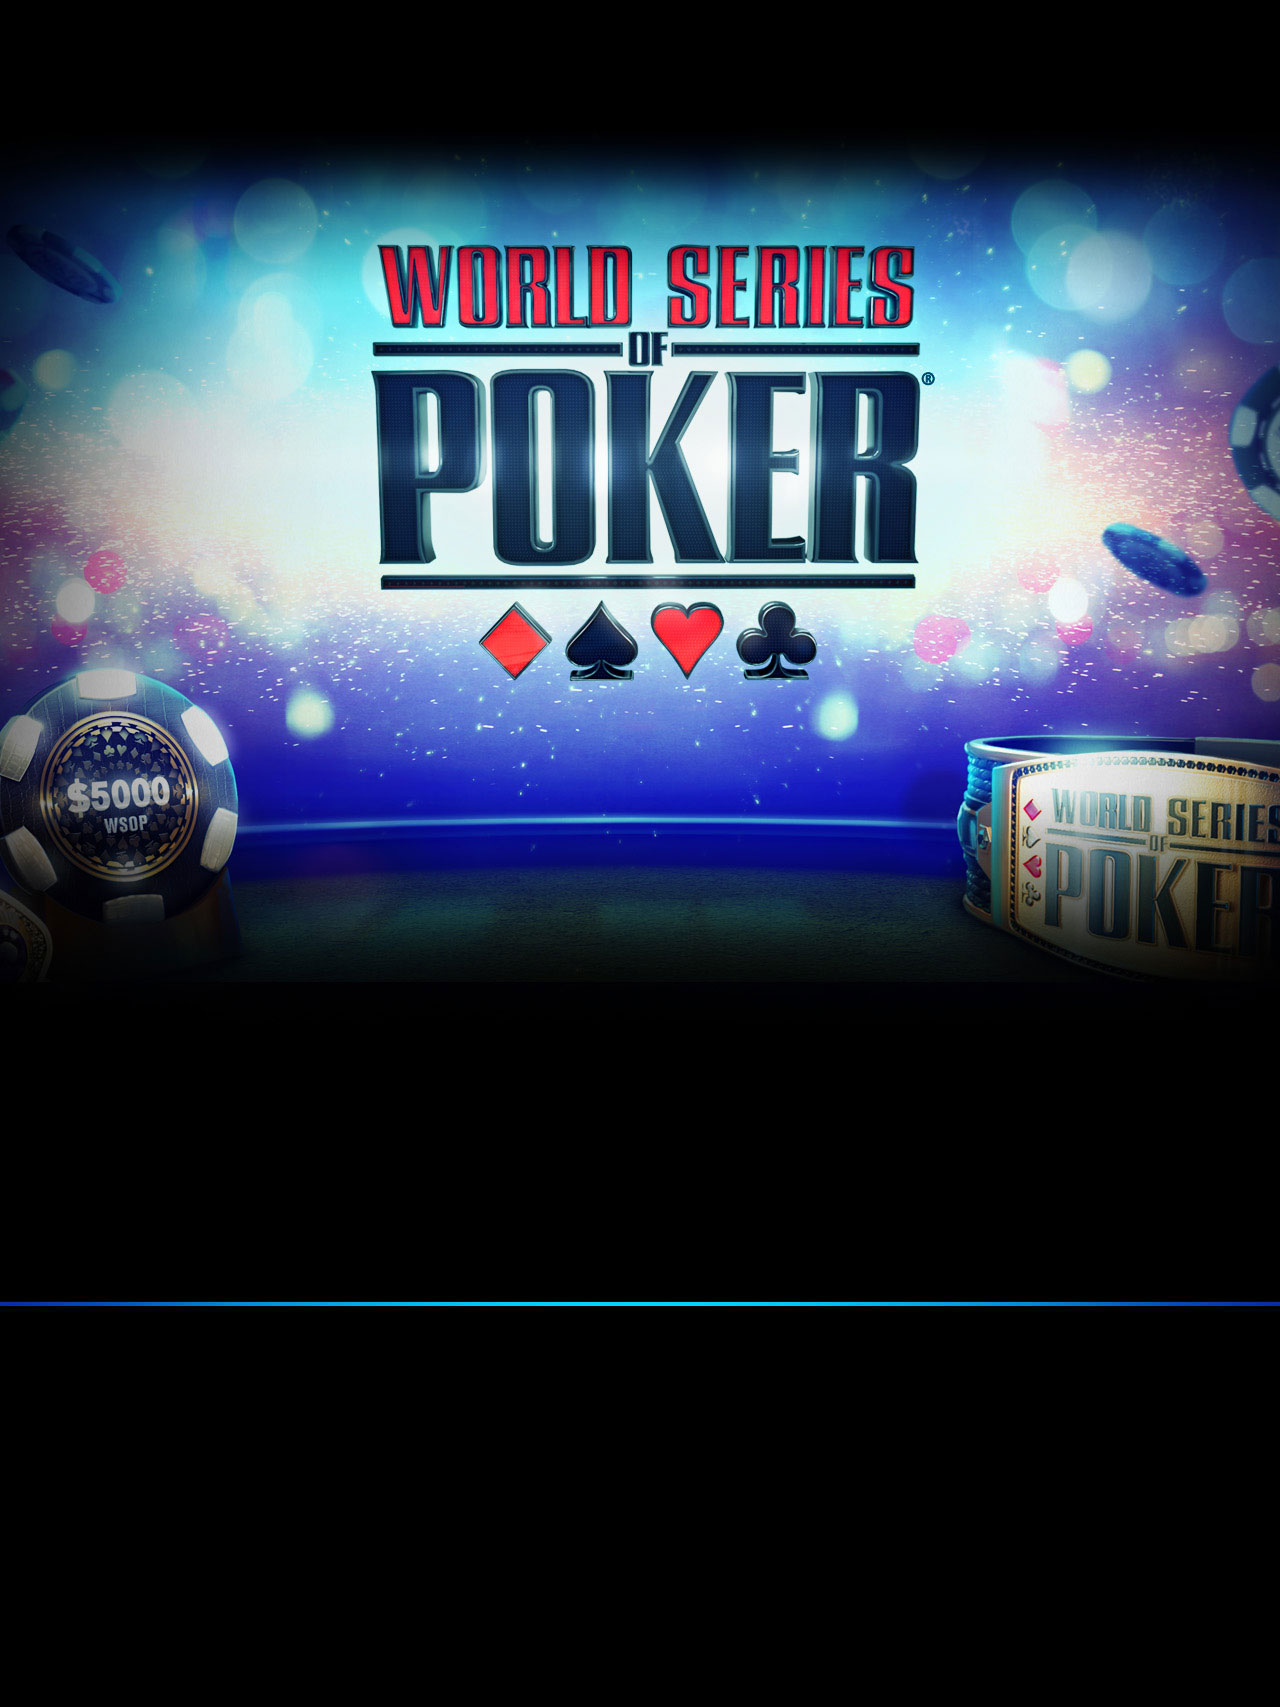 What is the World Series of Poker (WSOP)?